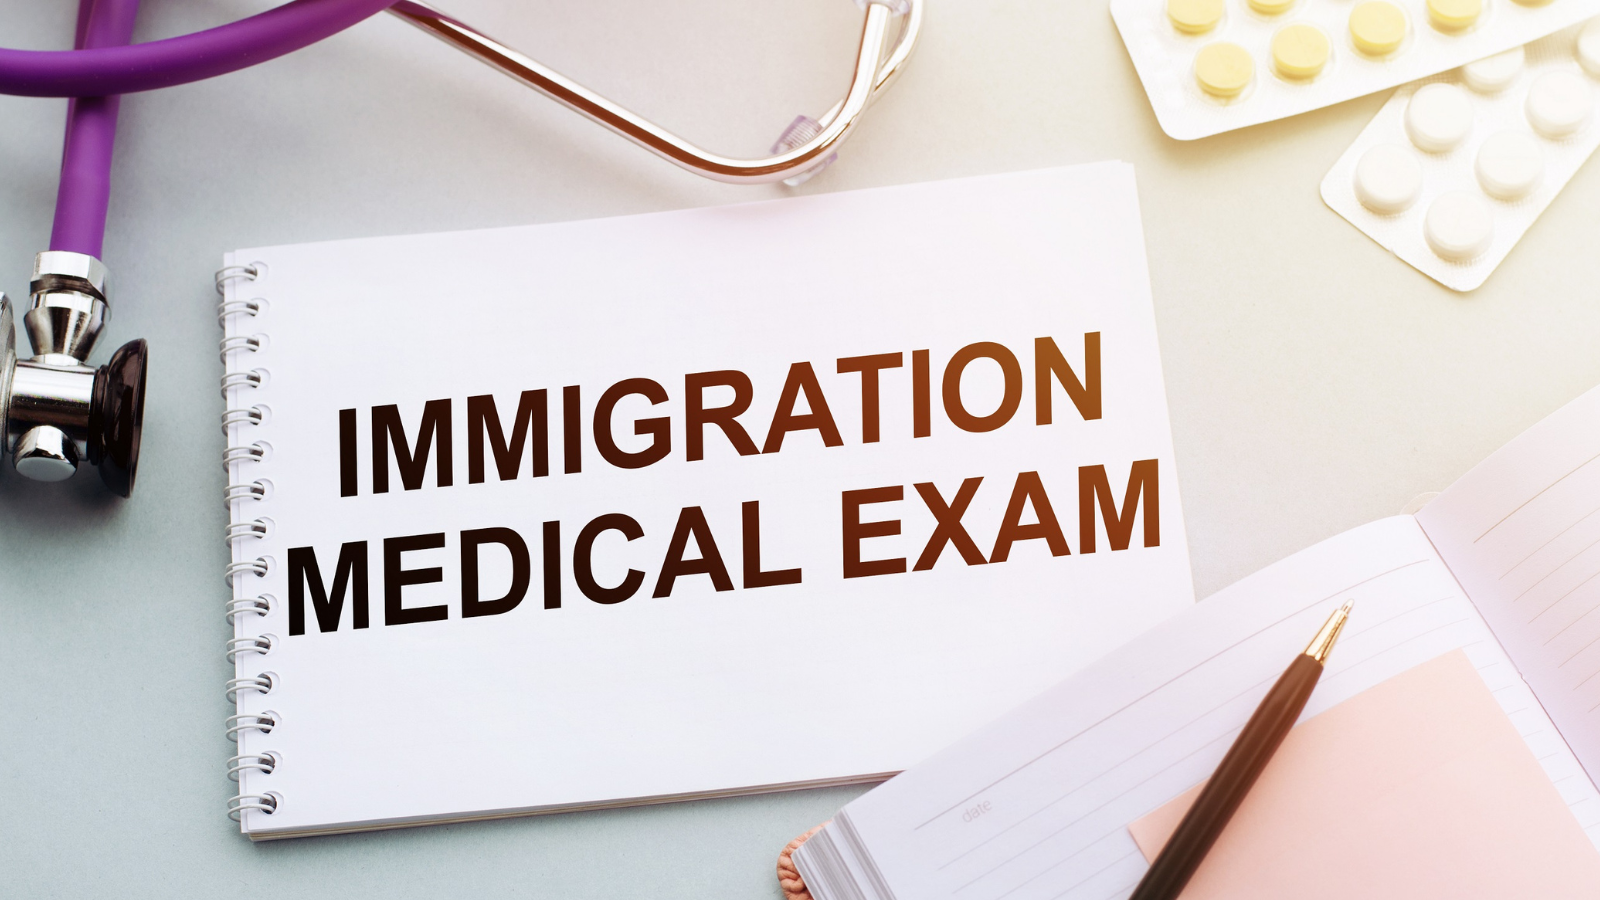 Five Top Rated Authorized Doctors for Immigration Medical Exam in Overland Park, Kansas